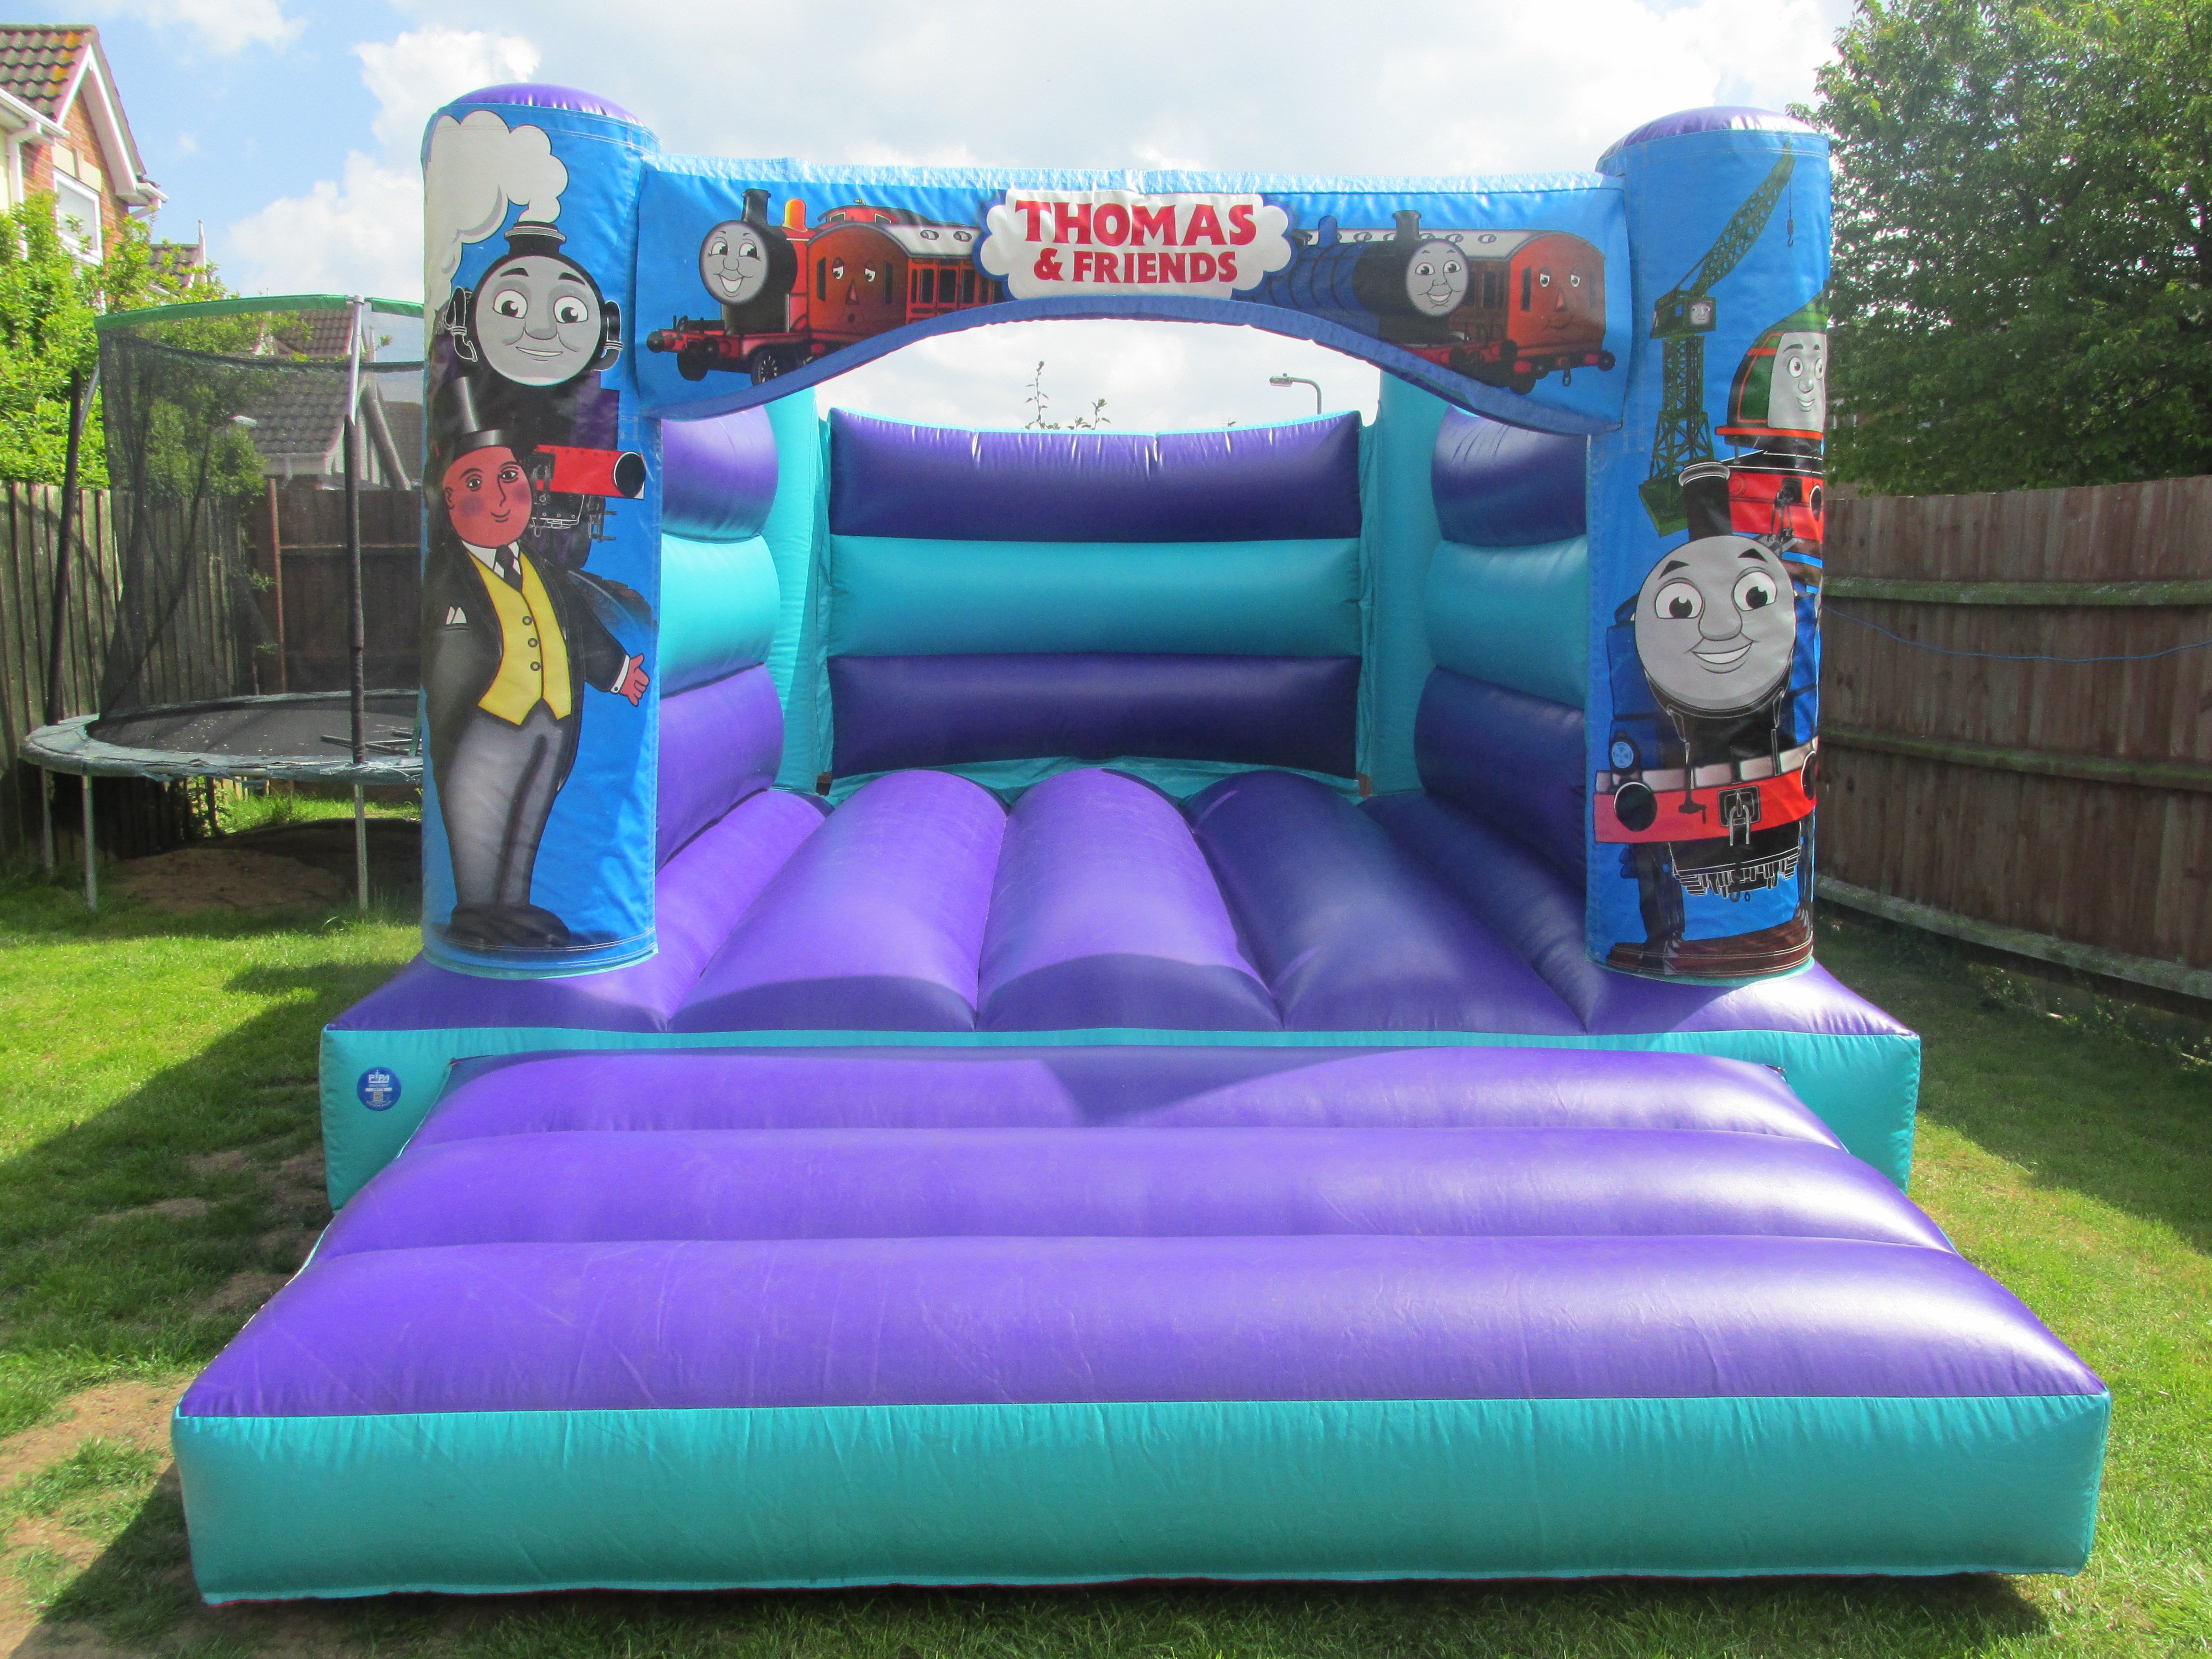 Thomas And Friends themed Bouncy Castle Hire In Bourne, Peterborough and Spalding